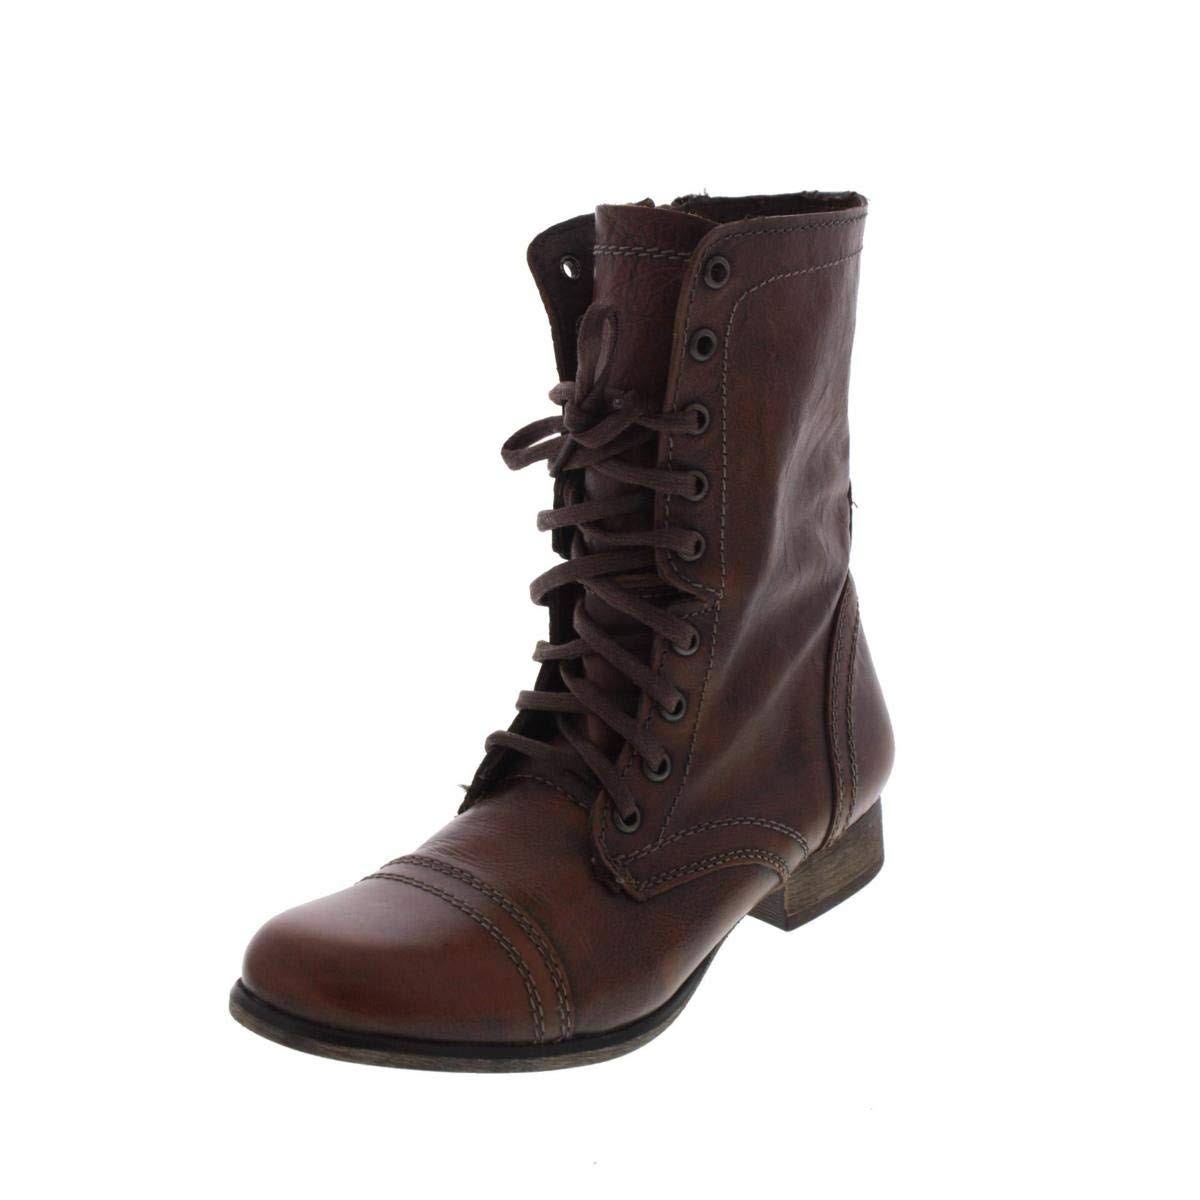 Leather Combat Boot with Round Toe and Zip | Image